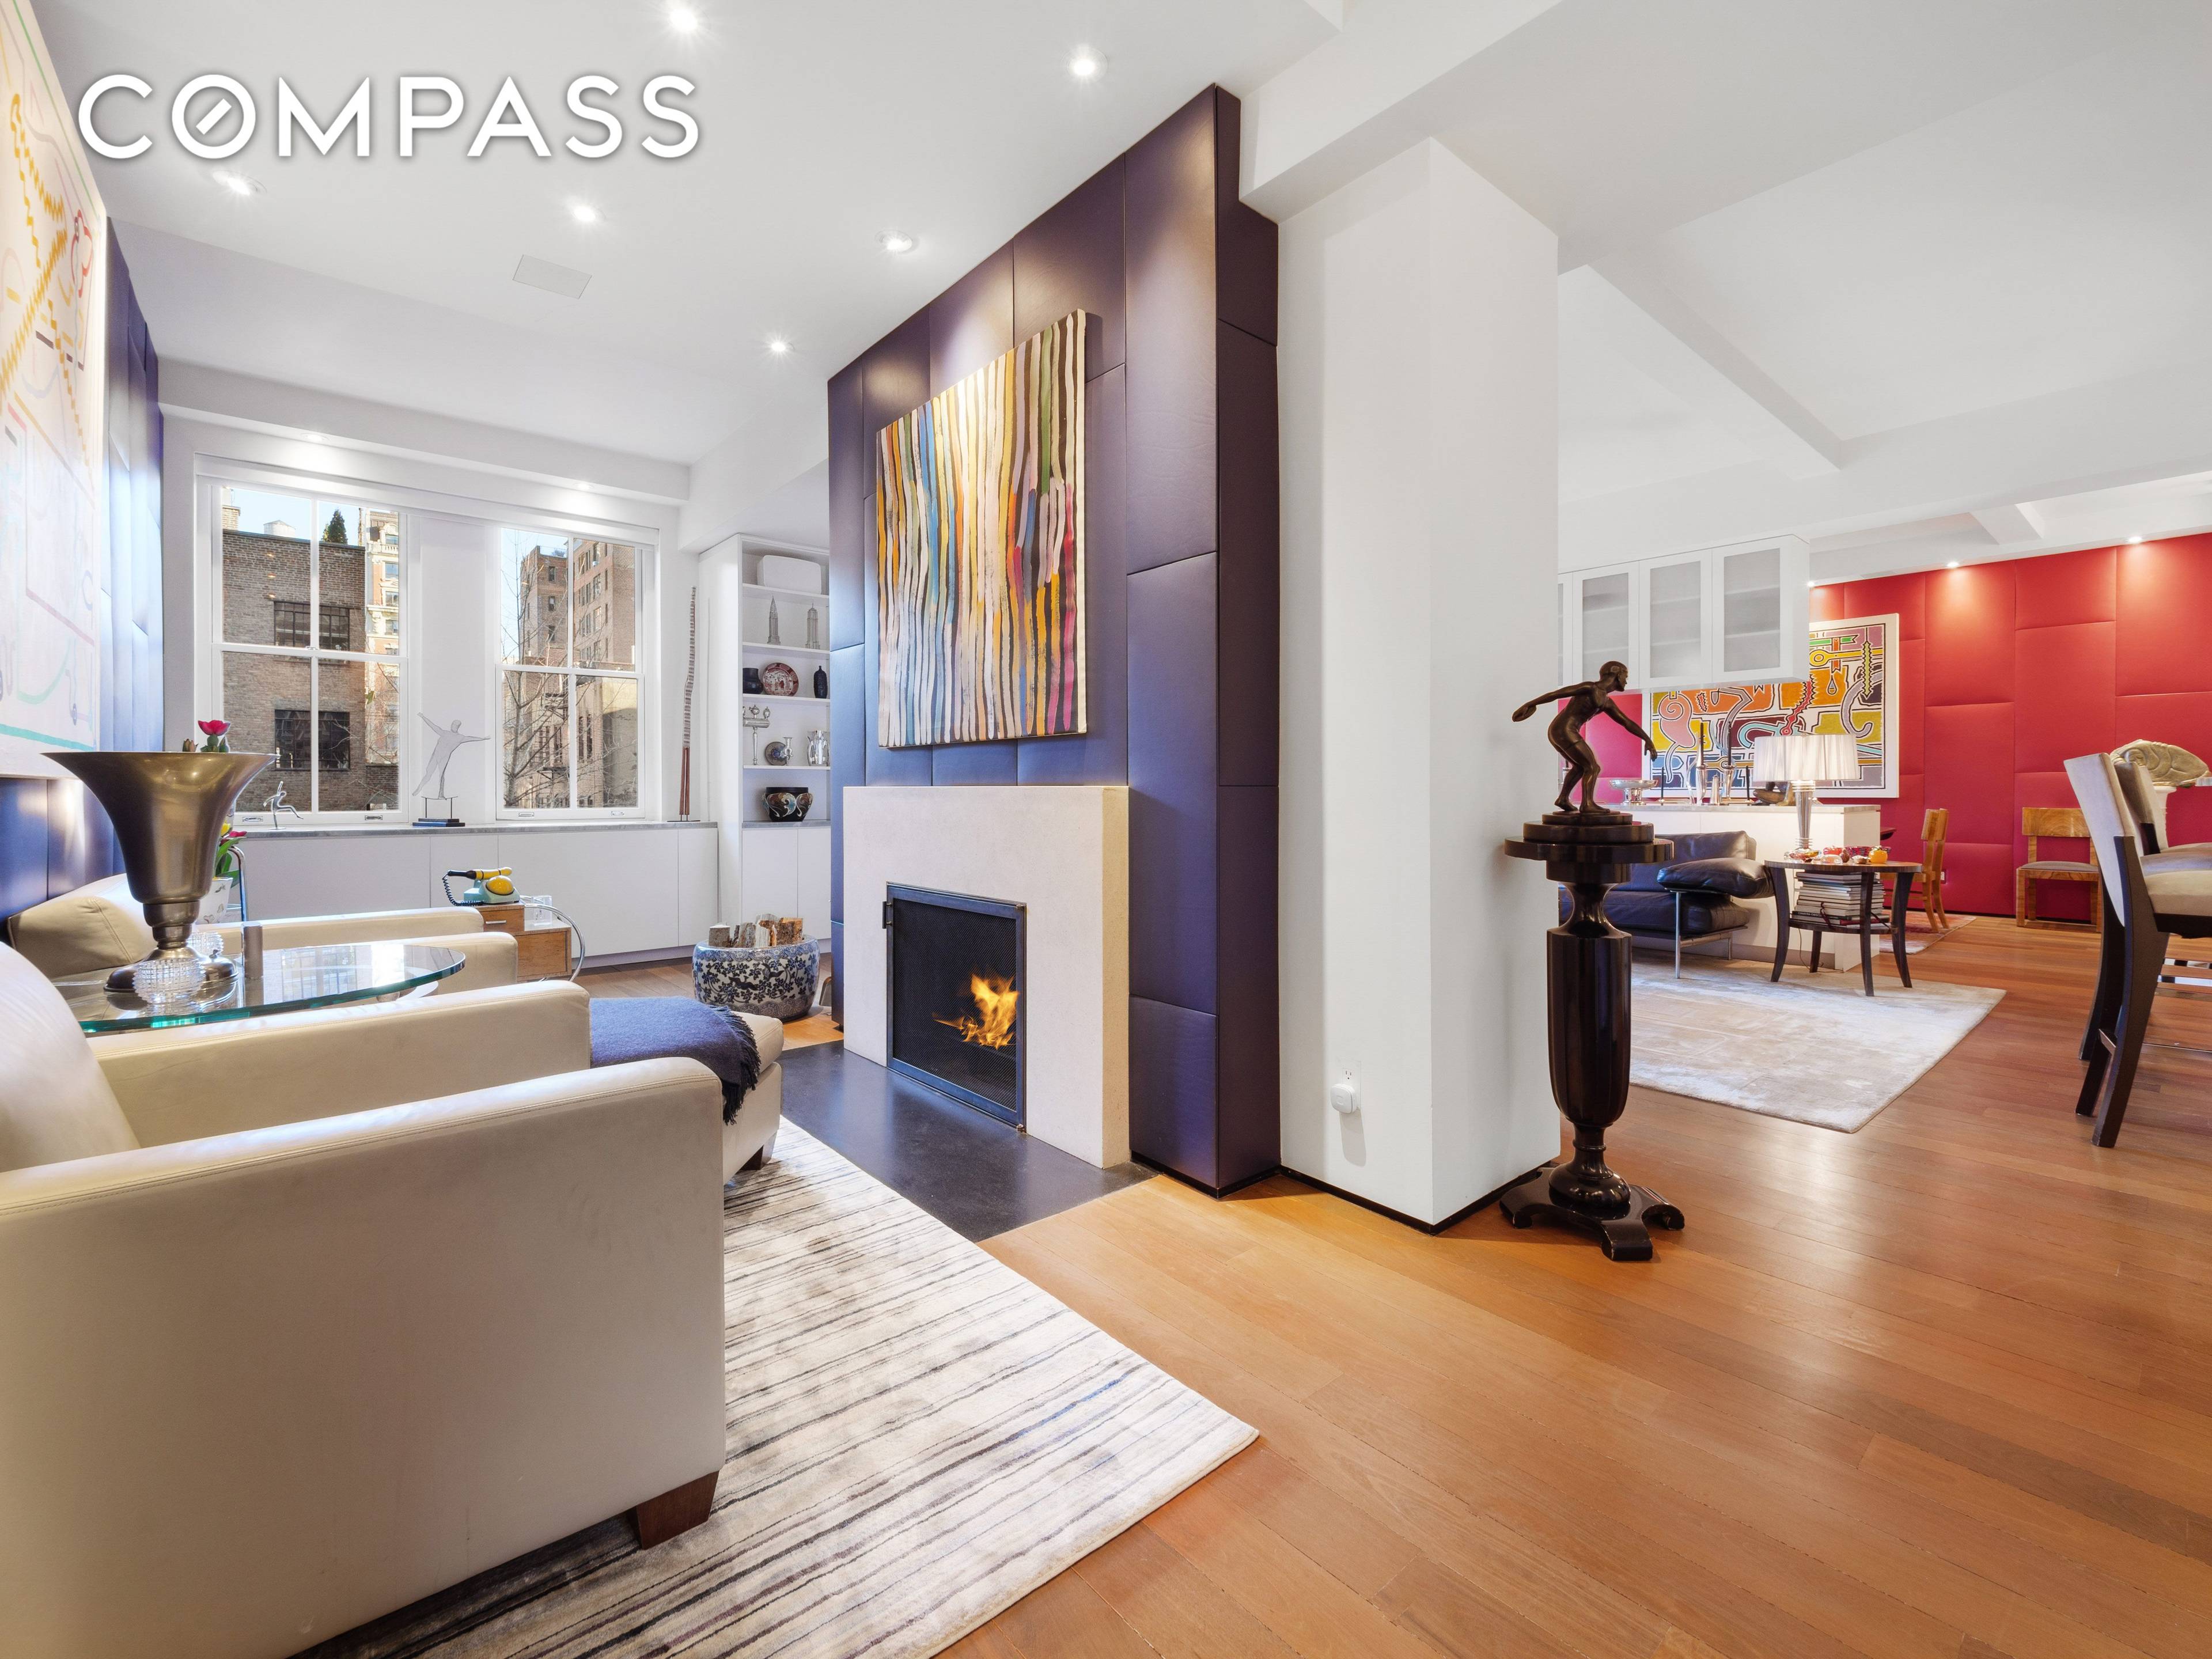 Located in the heart of Greenwich Village, this meticulously renovated oversized one bedroom with 10 foot ceilings is ideal for entertaining and gracious living.